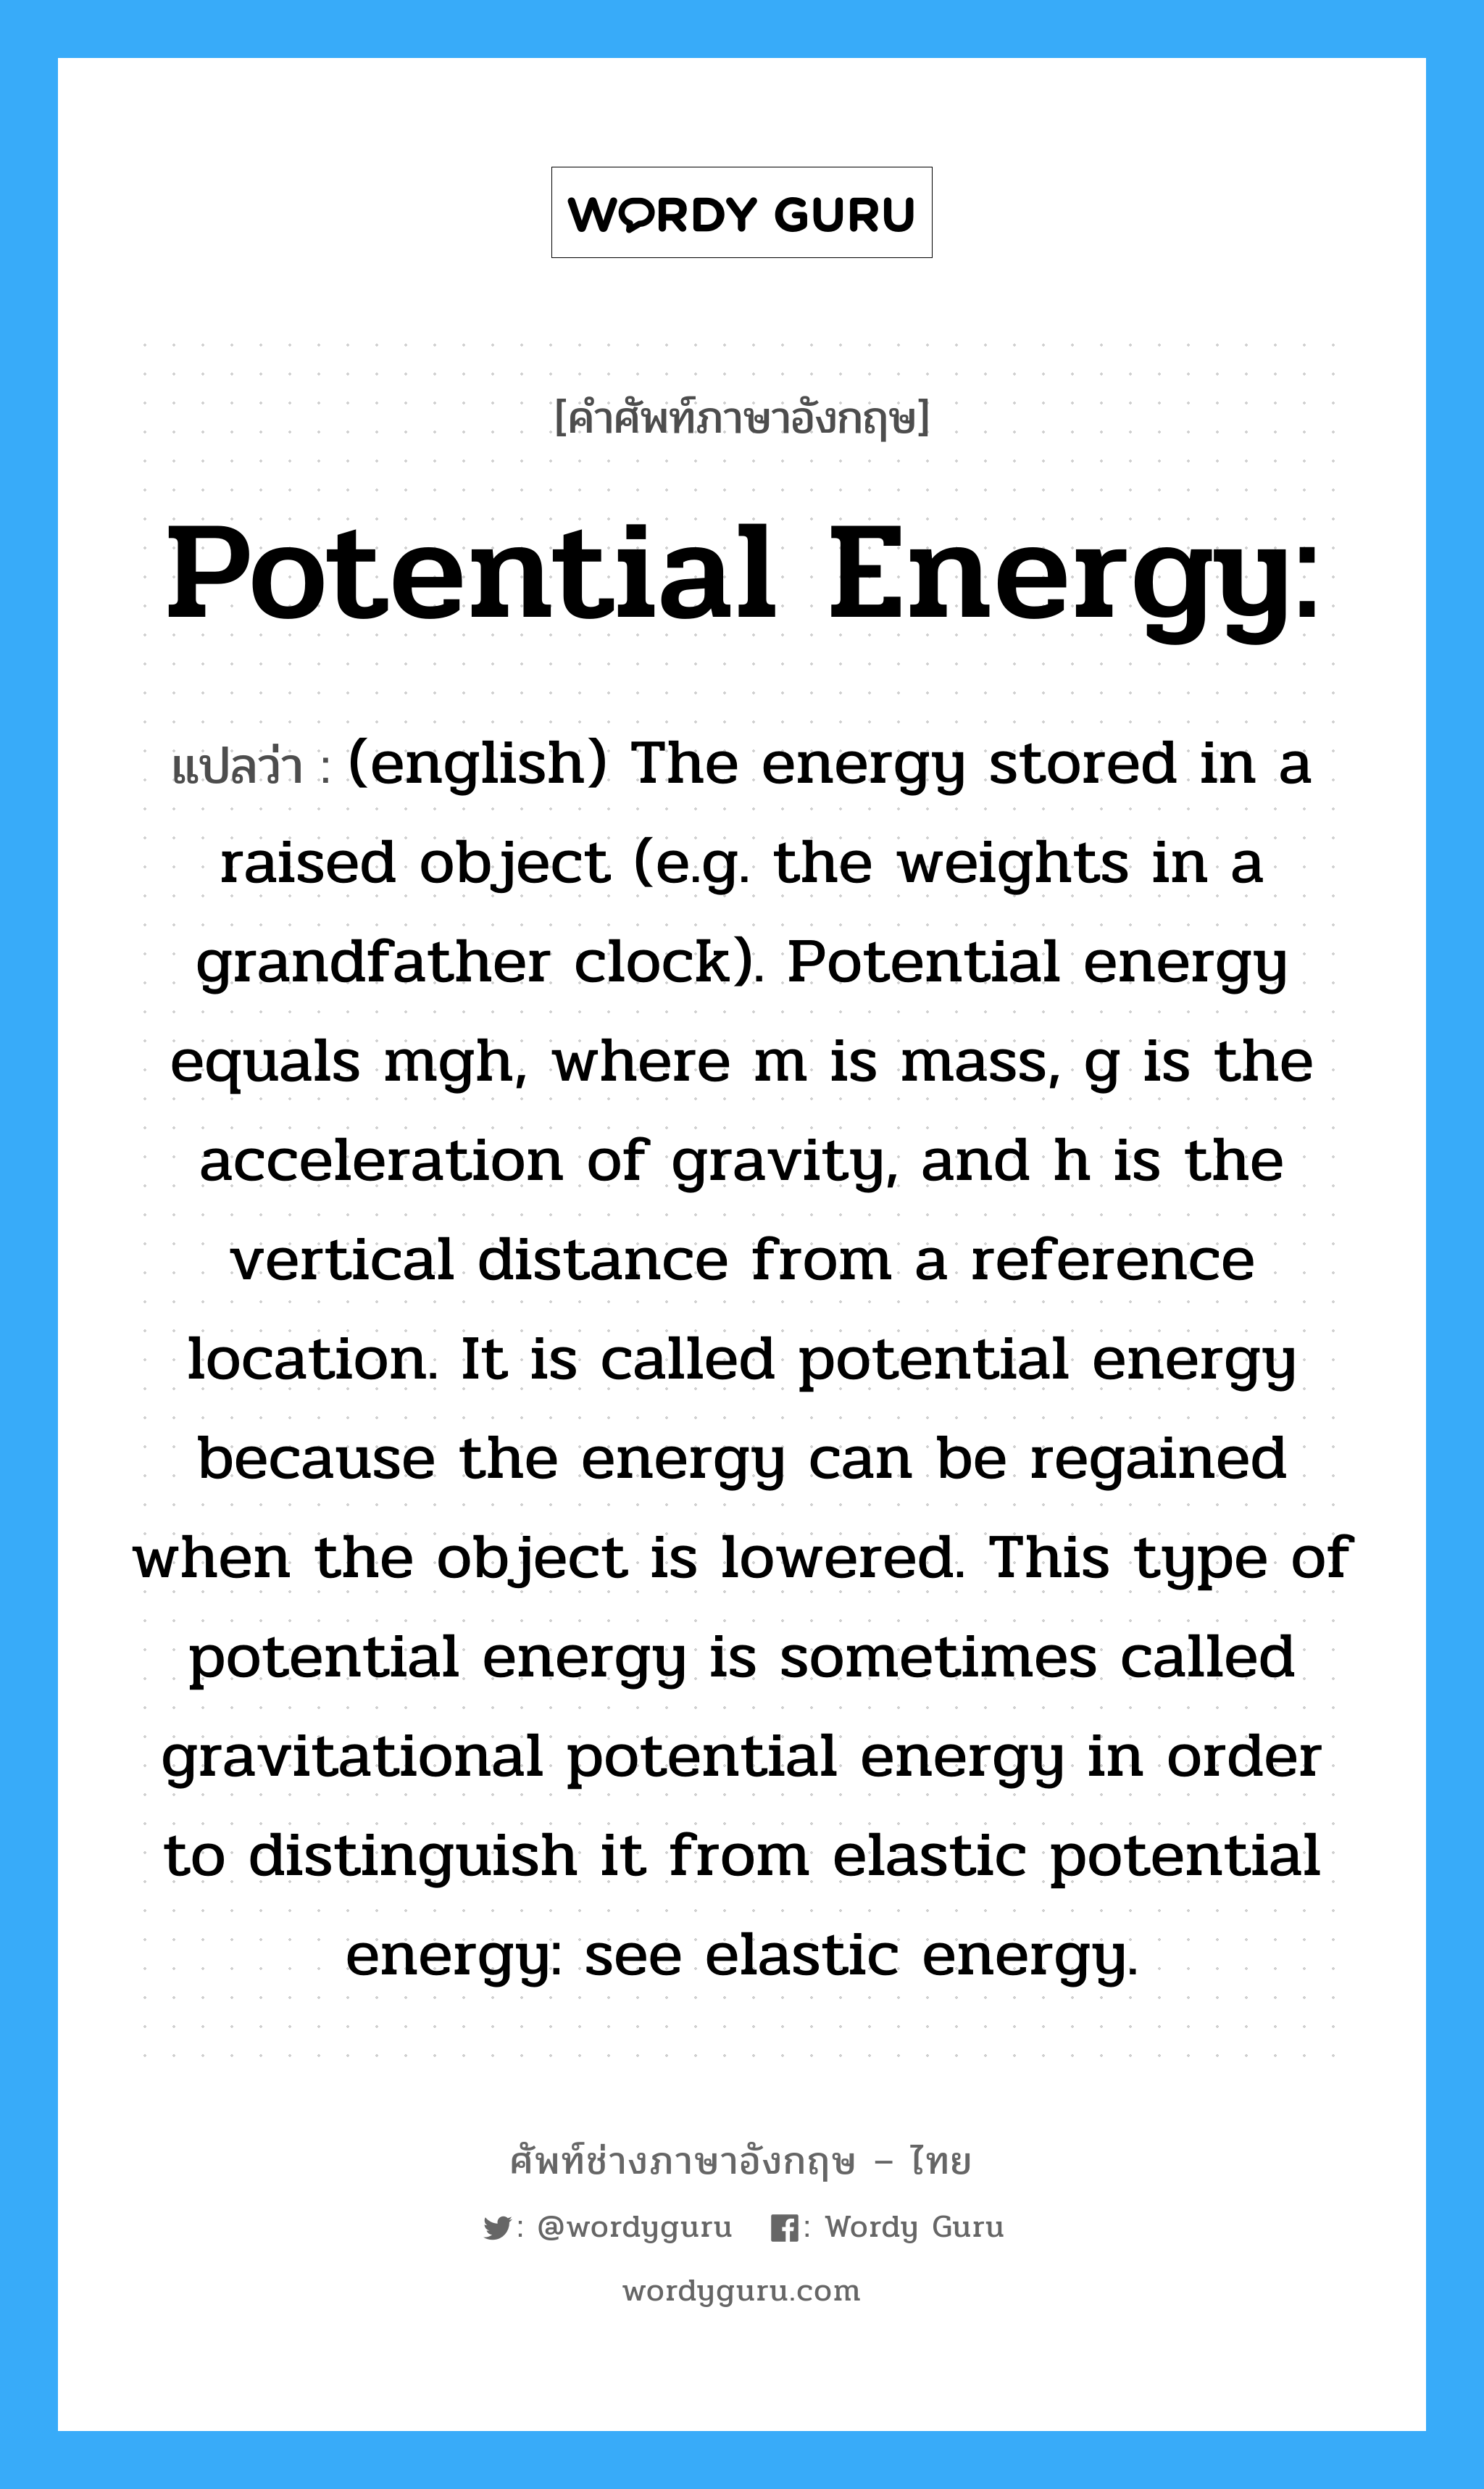 (english) The energy stored in a raised object (e.g. the weights in a grandfather clock). Potential energy equals mgh, where m is mass, g is the acceleration of gravity, and h is the vertical distance from a reference location. It is called potential energy because the energy can be regained when the object is lowered. This type of potential energy is sometimes called gravitational potential energy in order to distinguish it from elastic potential energy: see elastic energy. ภาษาอังกฤษ?, คำศัพท์ช่างภาษาอังกฤษ - ไทย (english) The energy stored in a raised object (e.g. the weights in a grandfather clock). Potential energy equals mgh, where m is mass, g is the acceleration of gravity, and h is the vertical distance from a reference location. It is called potential energy because the energy can be regained when the object is lowered. This type of potential energy is sometimes called gravitational potential energy in order to distinguish it from elastic potential energy: see elastic energy. คำศัพท์ภาษาอังกฤษ (english) The energy stored in a raised object (e.g. the weights in a grandfather clock). Potential energy equals mgh, where m is mass, g is the acceleration of gravity, and h is the vertical distance from a reference location. It is called potential energy because the energy can be regained when the object is lowered. This type of potential energy is sometimes called gravitational potential energy in order to distinguish it from elastic potential energy: see elastic energy. แปลว่า Potential Energy: